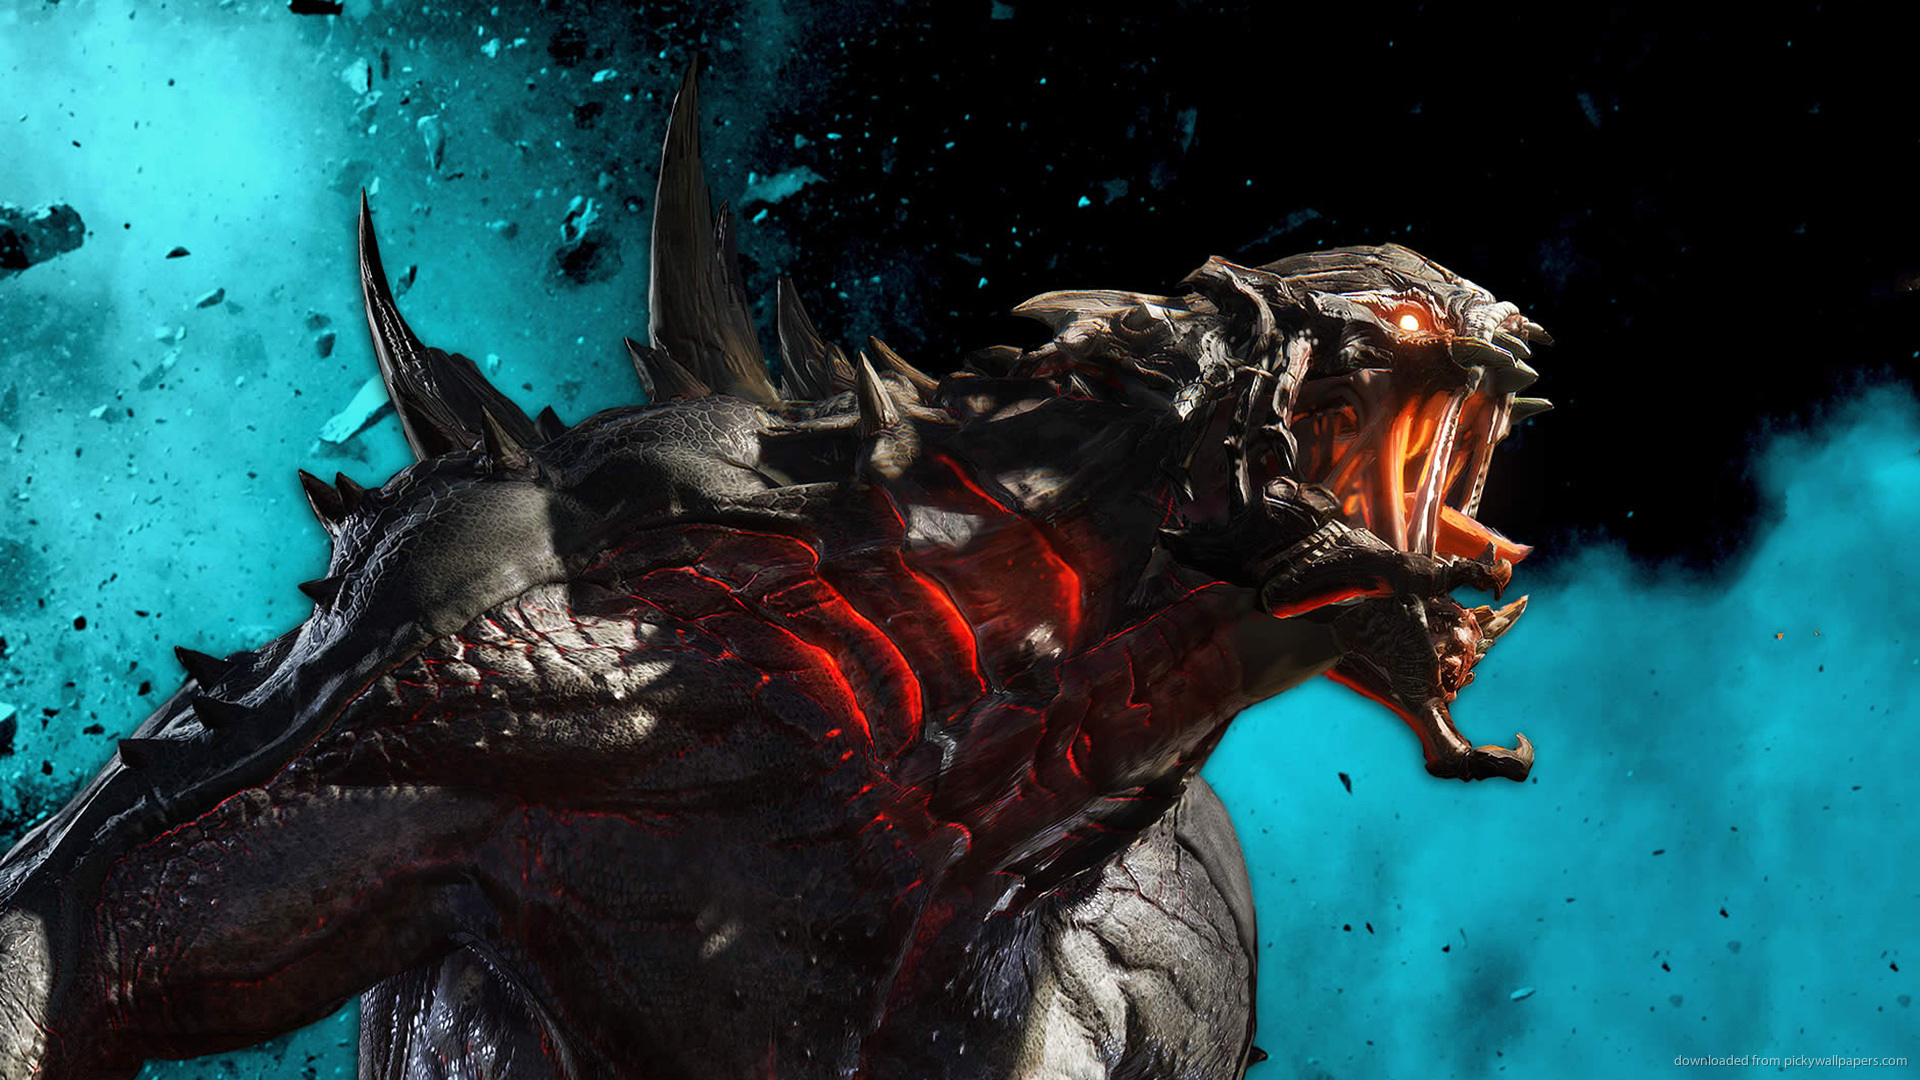 Evolve Video Game Goliath Monster Wallpaper Picture For iPhone